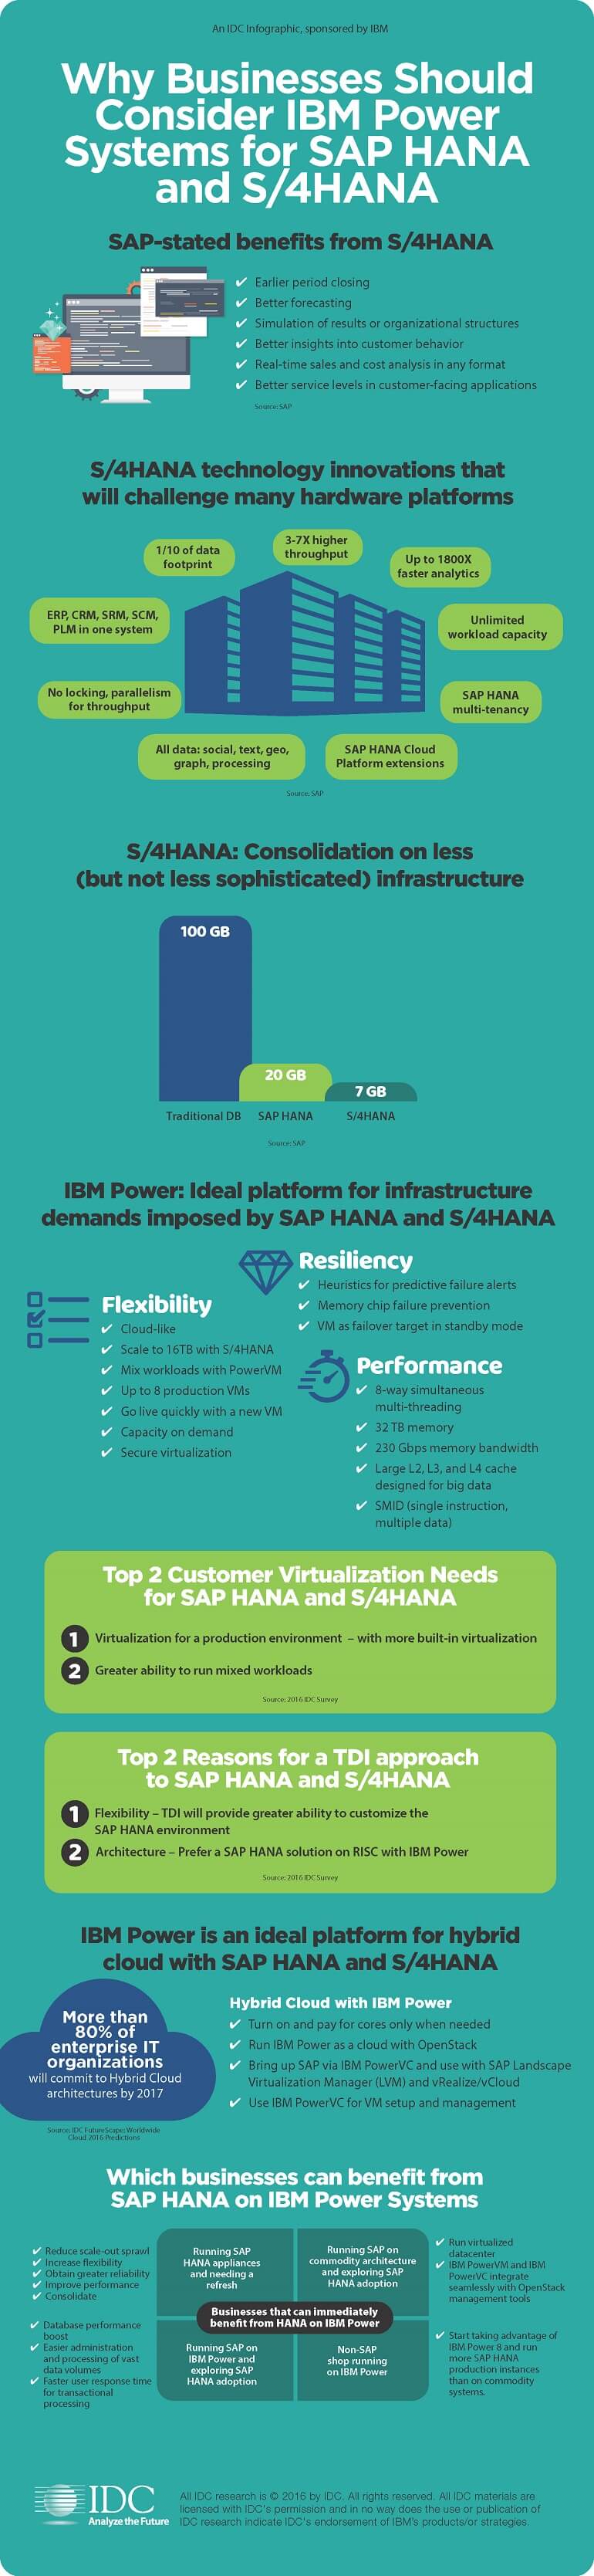 Article Why Consider IBM Power Systems Image